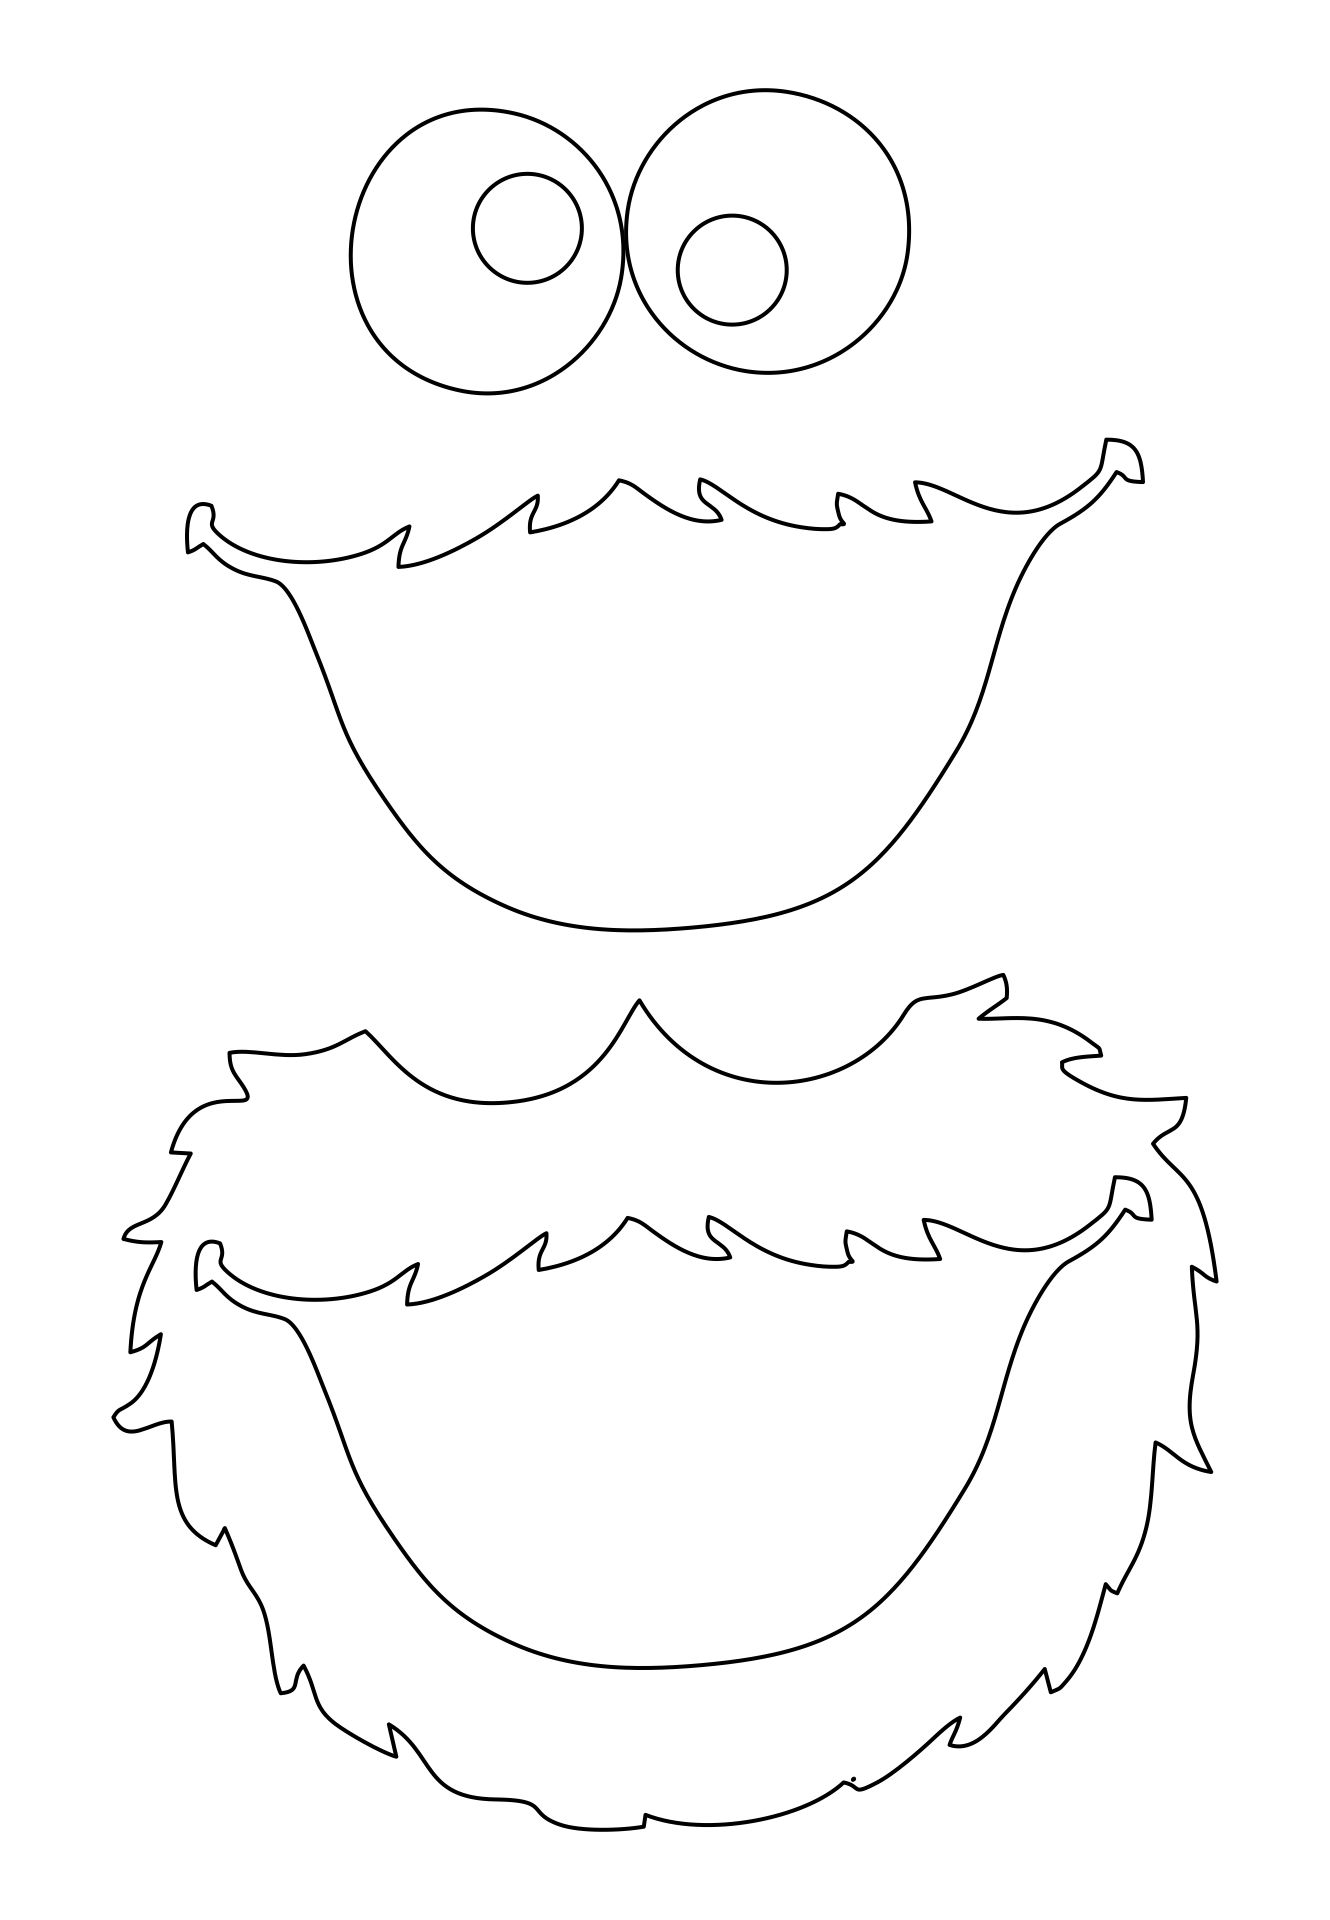 cookie monster cut out template